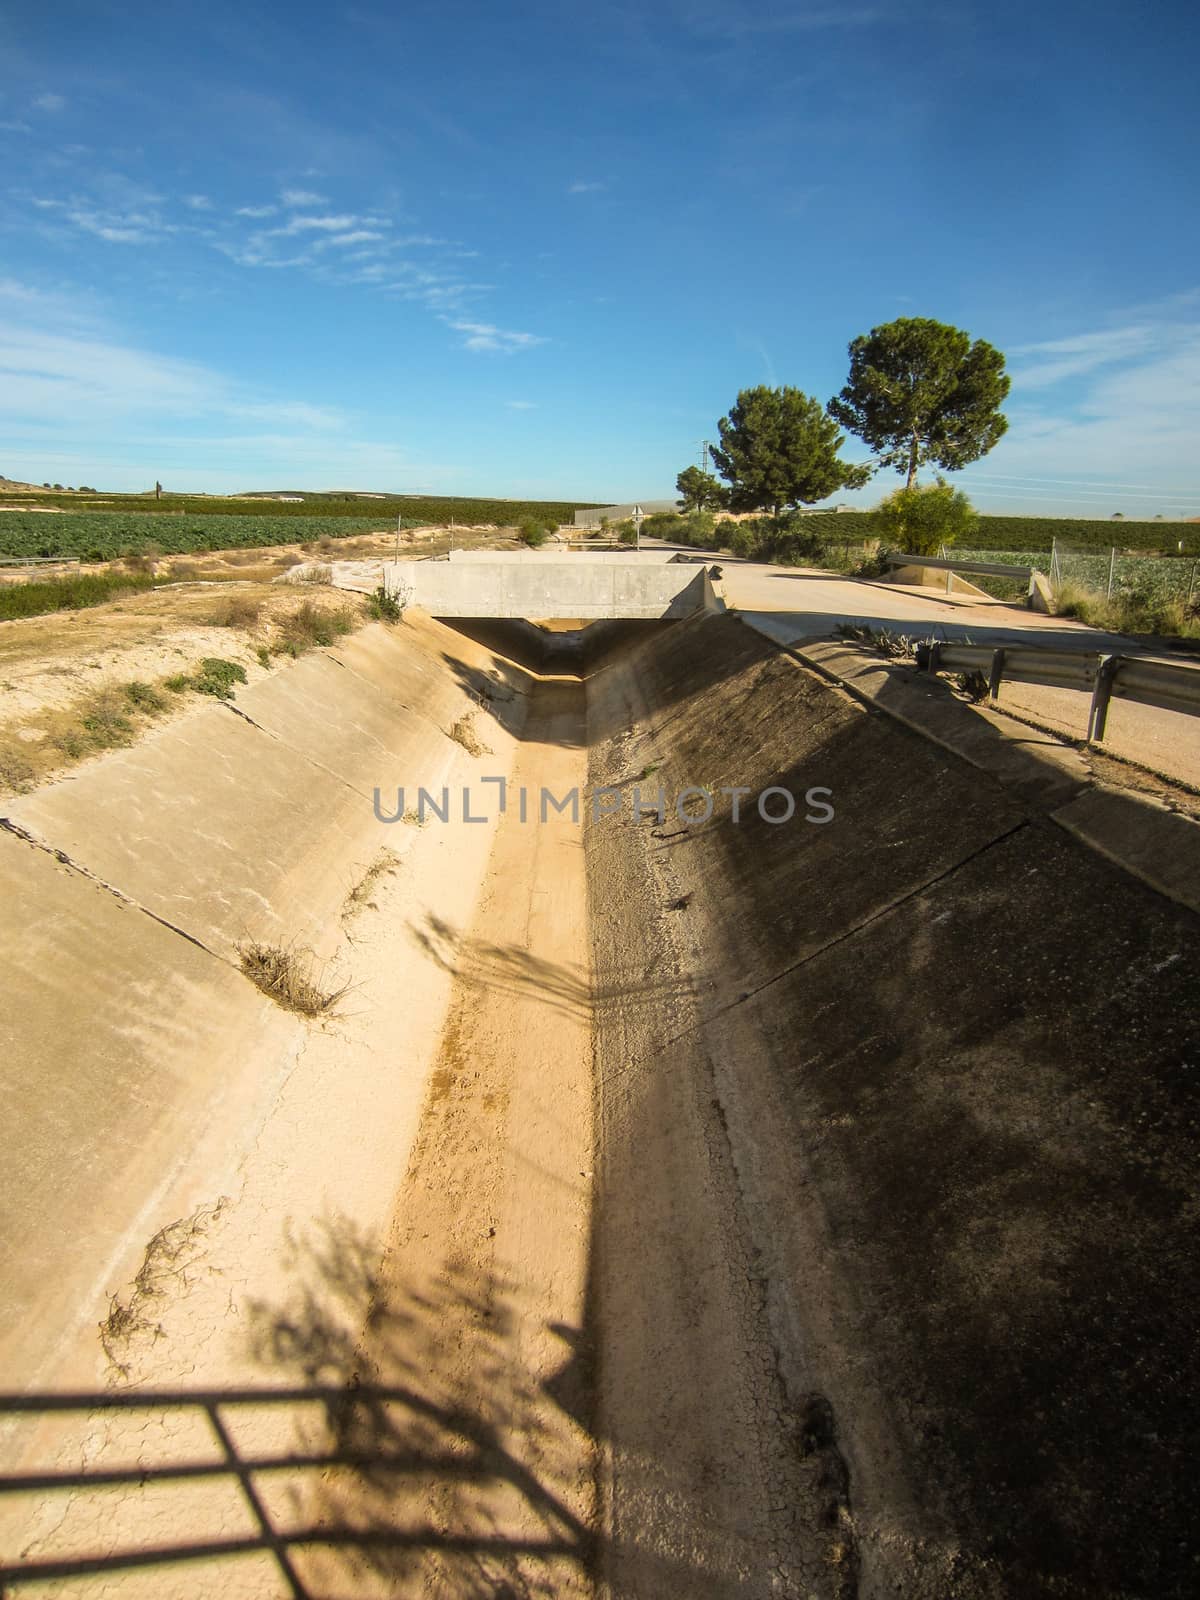 dried out aqueduct used to provide water to spanish fields